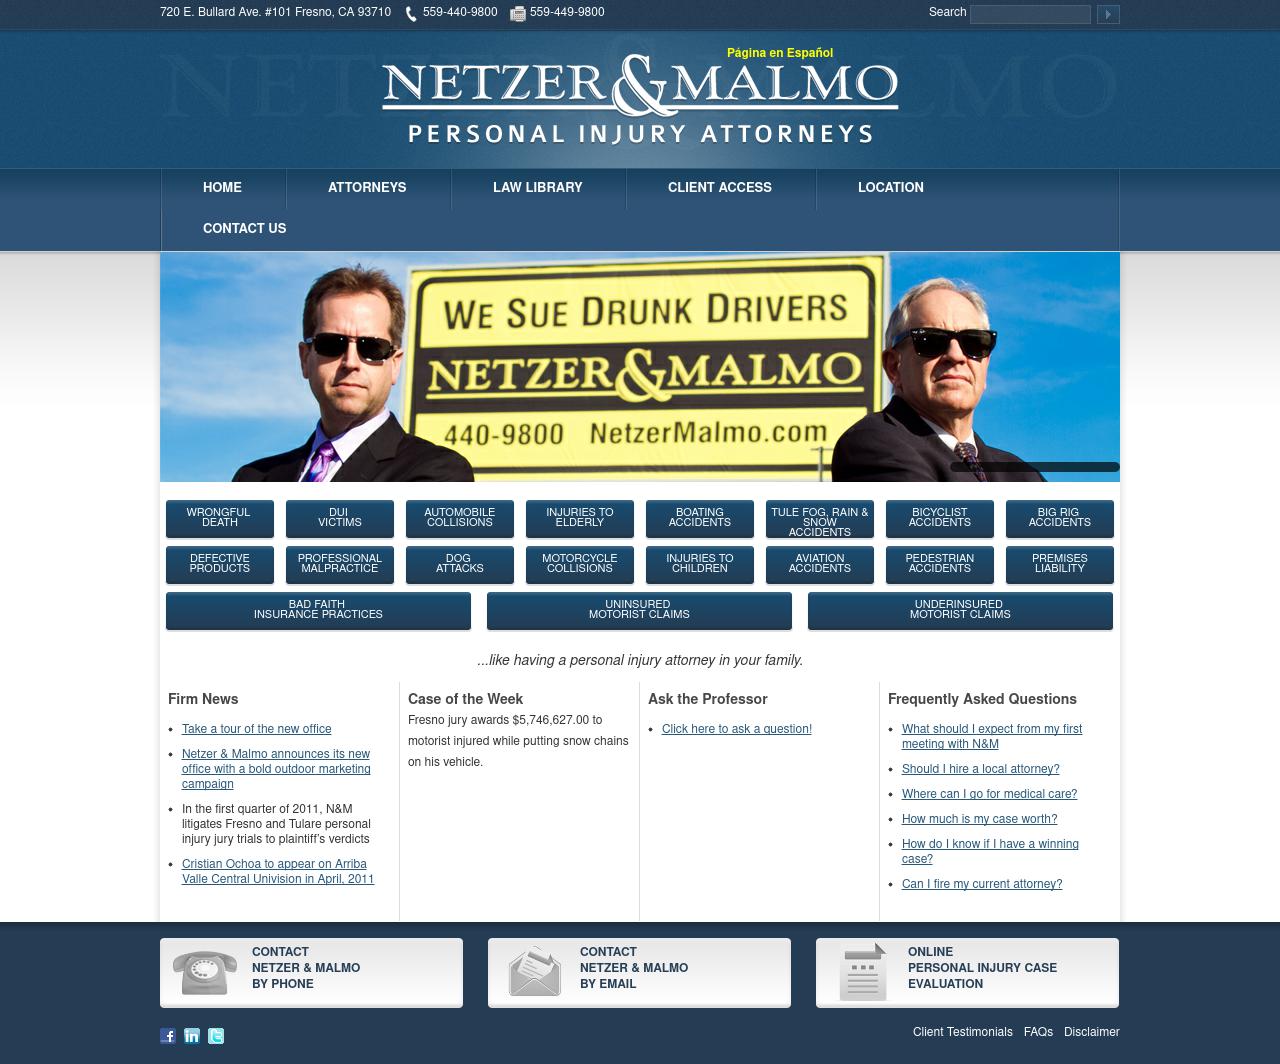 Netzer & Malmo Personal Injury Attorneys at Law - Fresno CA Lawyers